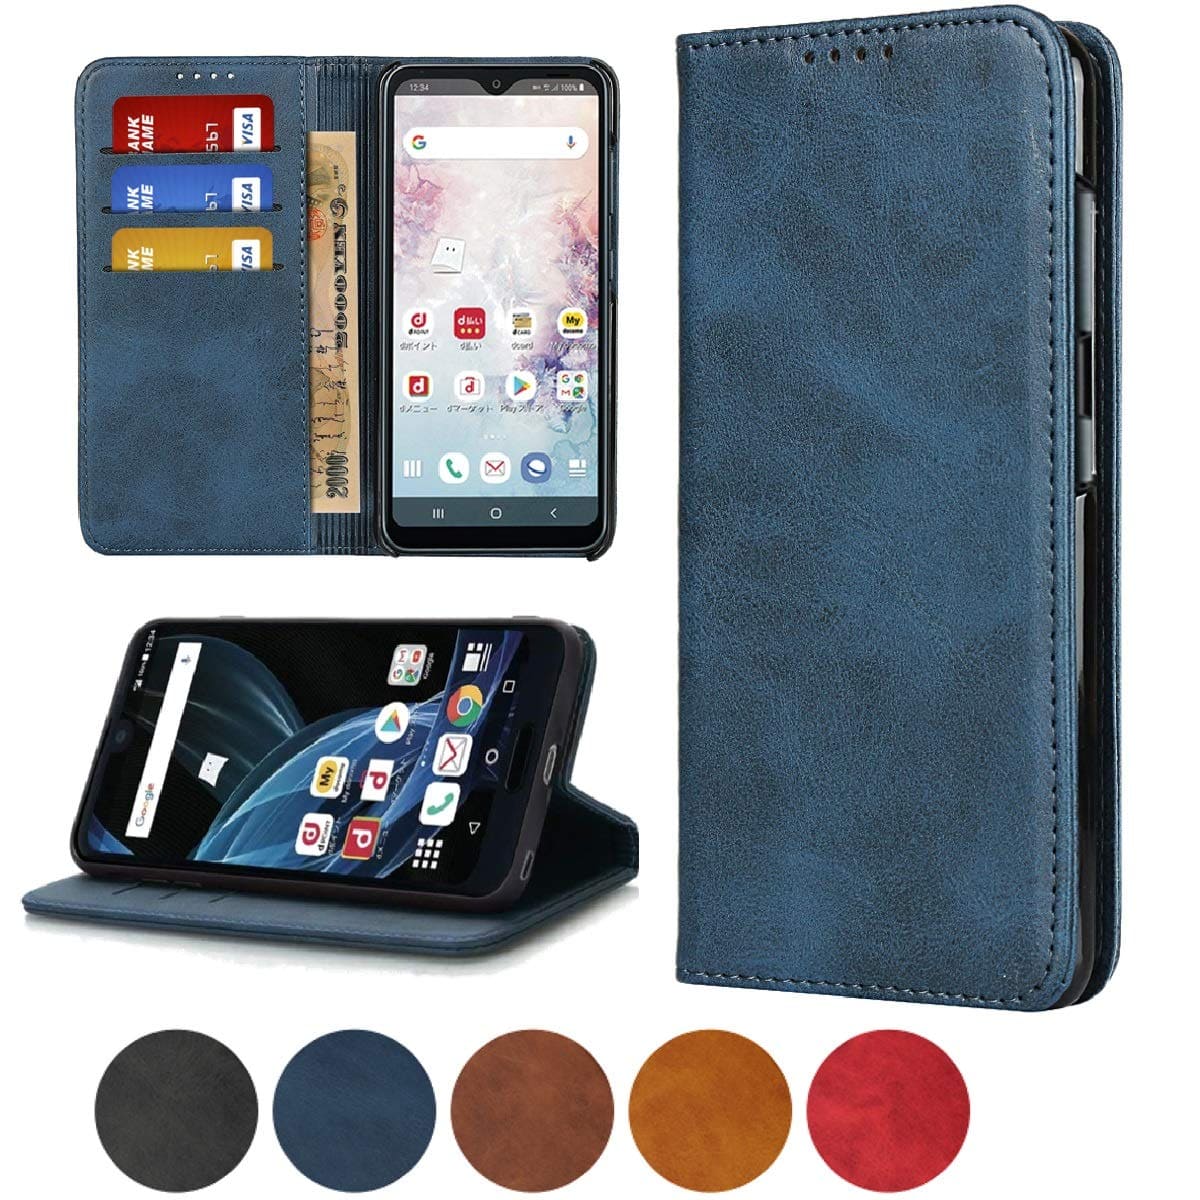 New Magnet Sharp Lye Male R3 Case Carrying Cover Card Pocket Card With A Built In Amount Of Sharp Aquos R3 Sh 04l Notebook Type Case Cover Sharp Lye Male R3 Sh 04l Shv44 Case Cover